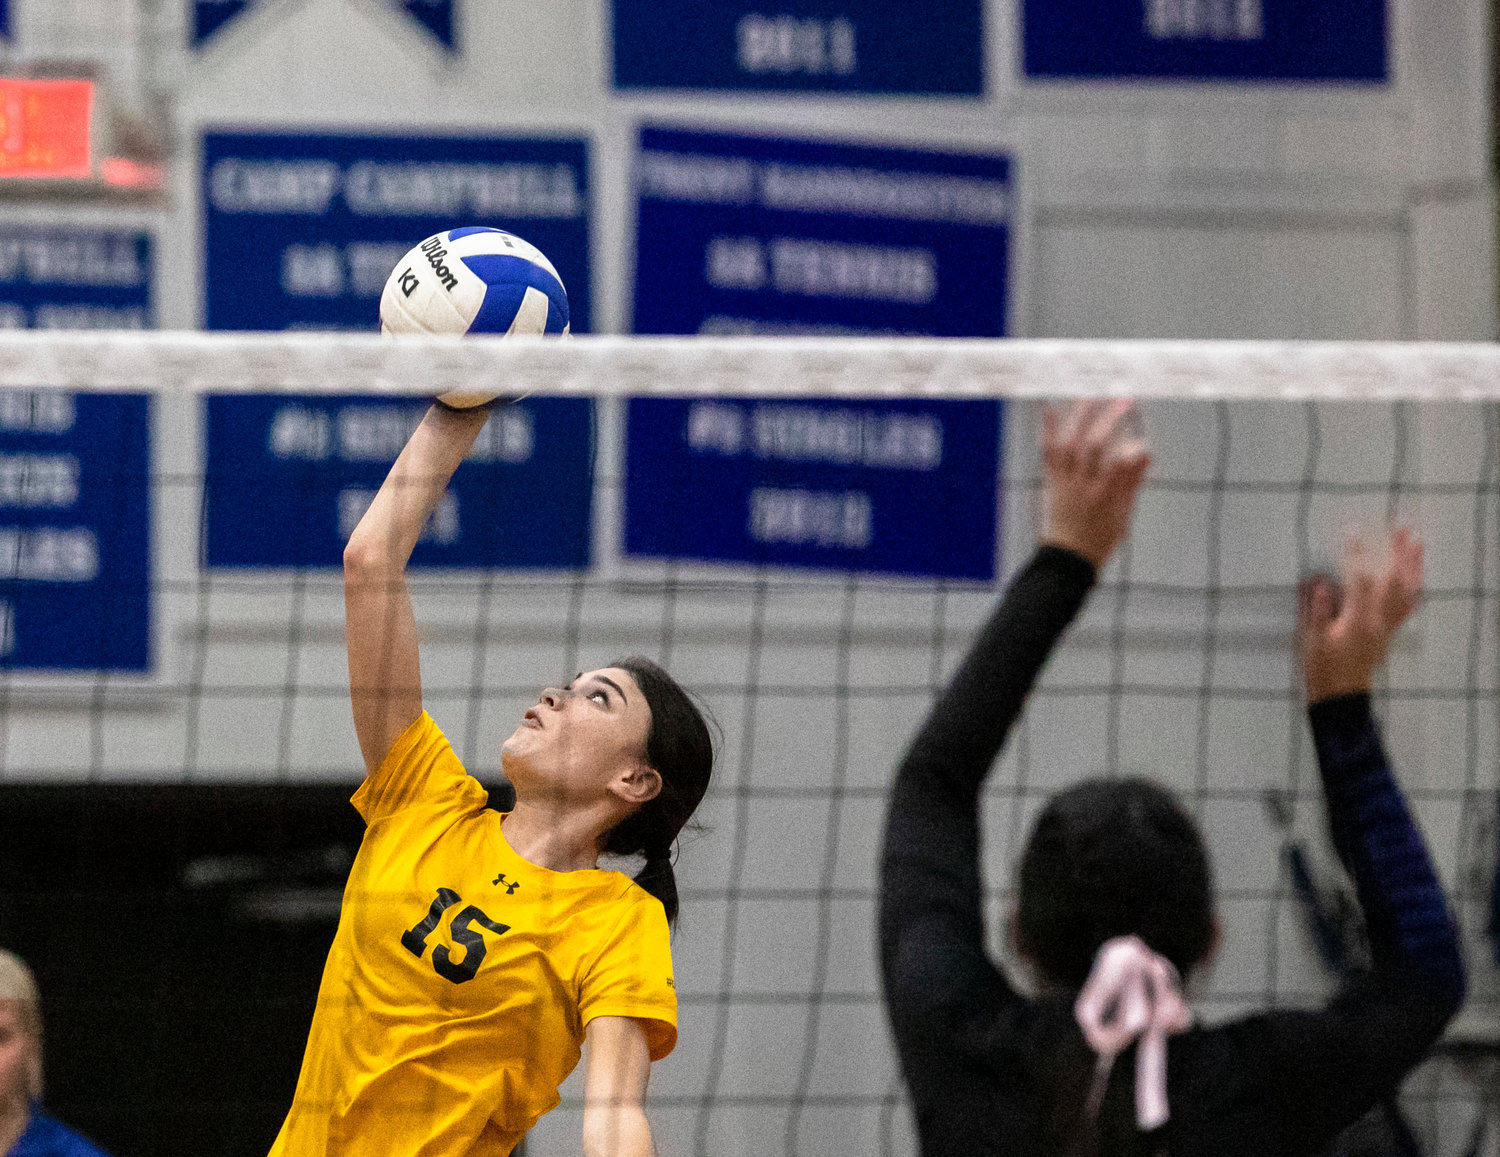 Spanish Fort junior Mary Madison Lyles connects on a spike during the Toros’ Class 6A Area 2 tournament championship match against Bayside Academy on the road Thursday night. Spanish Fort won 3-1 to earn the No. 1 seed heading into the South Super Regionals.